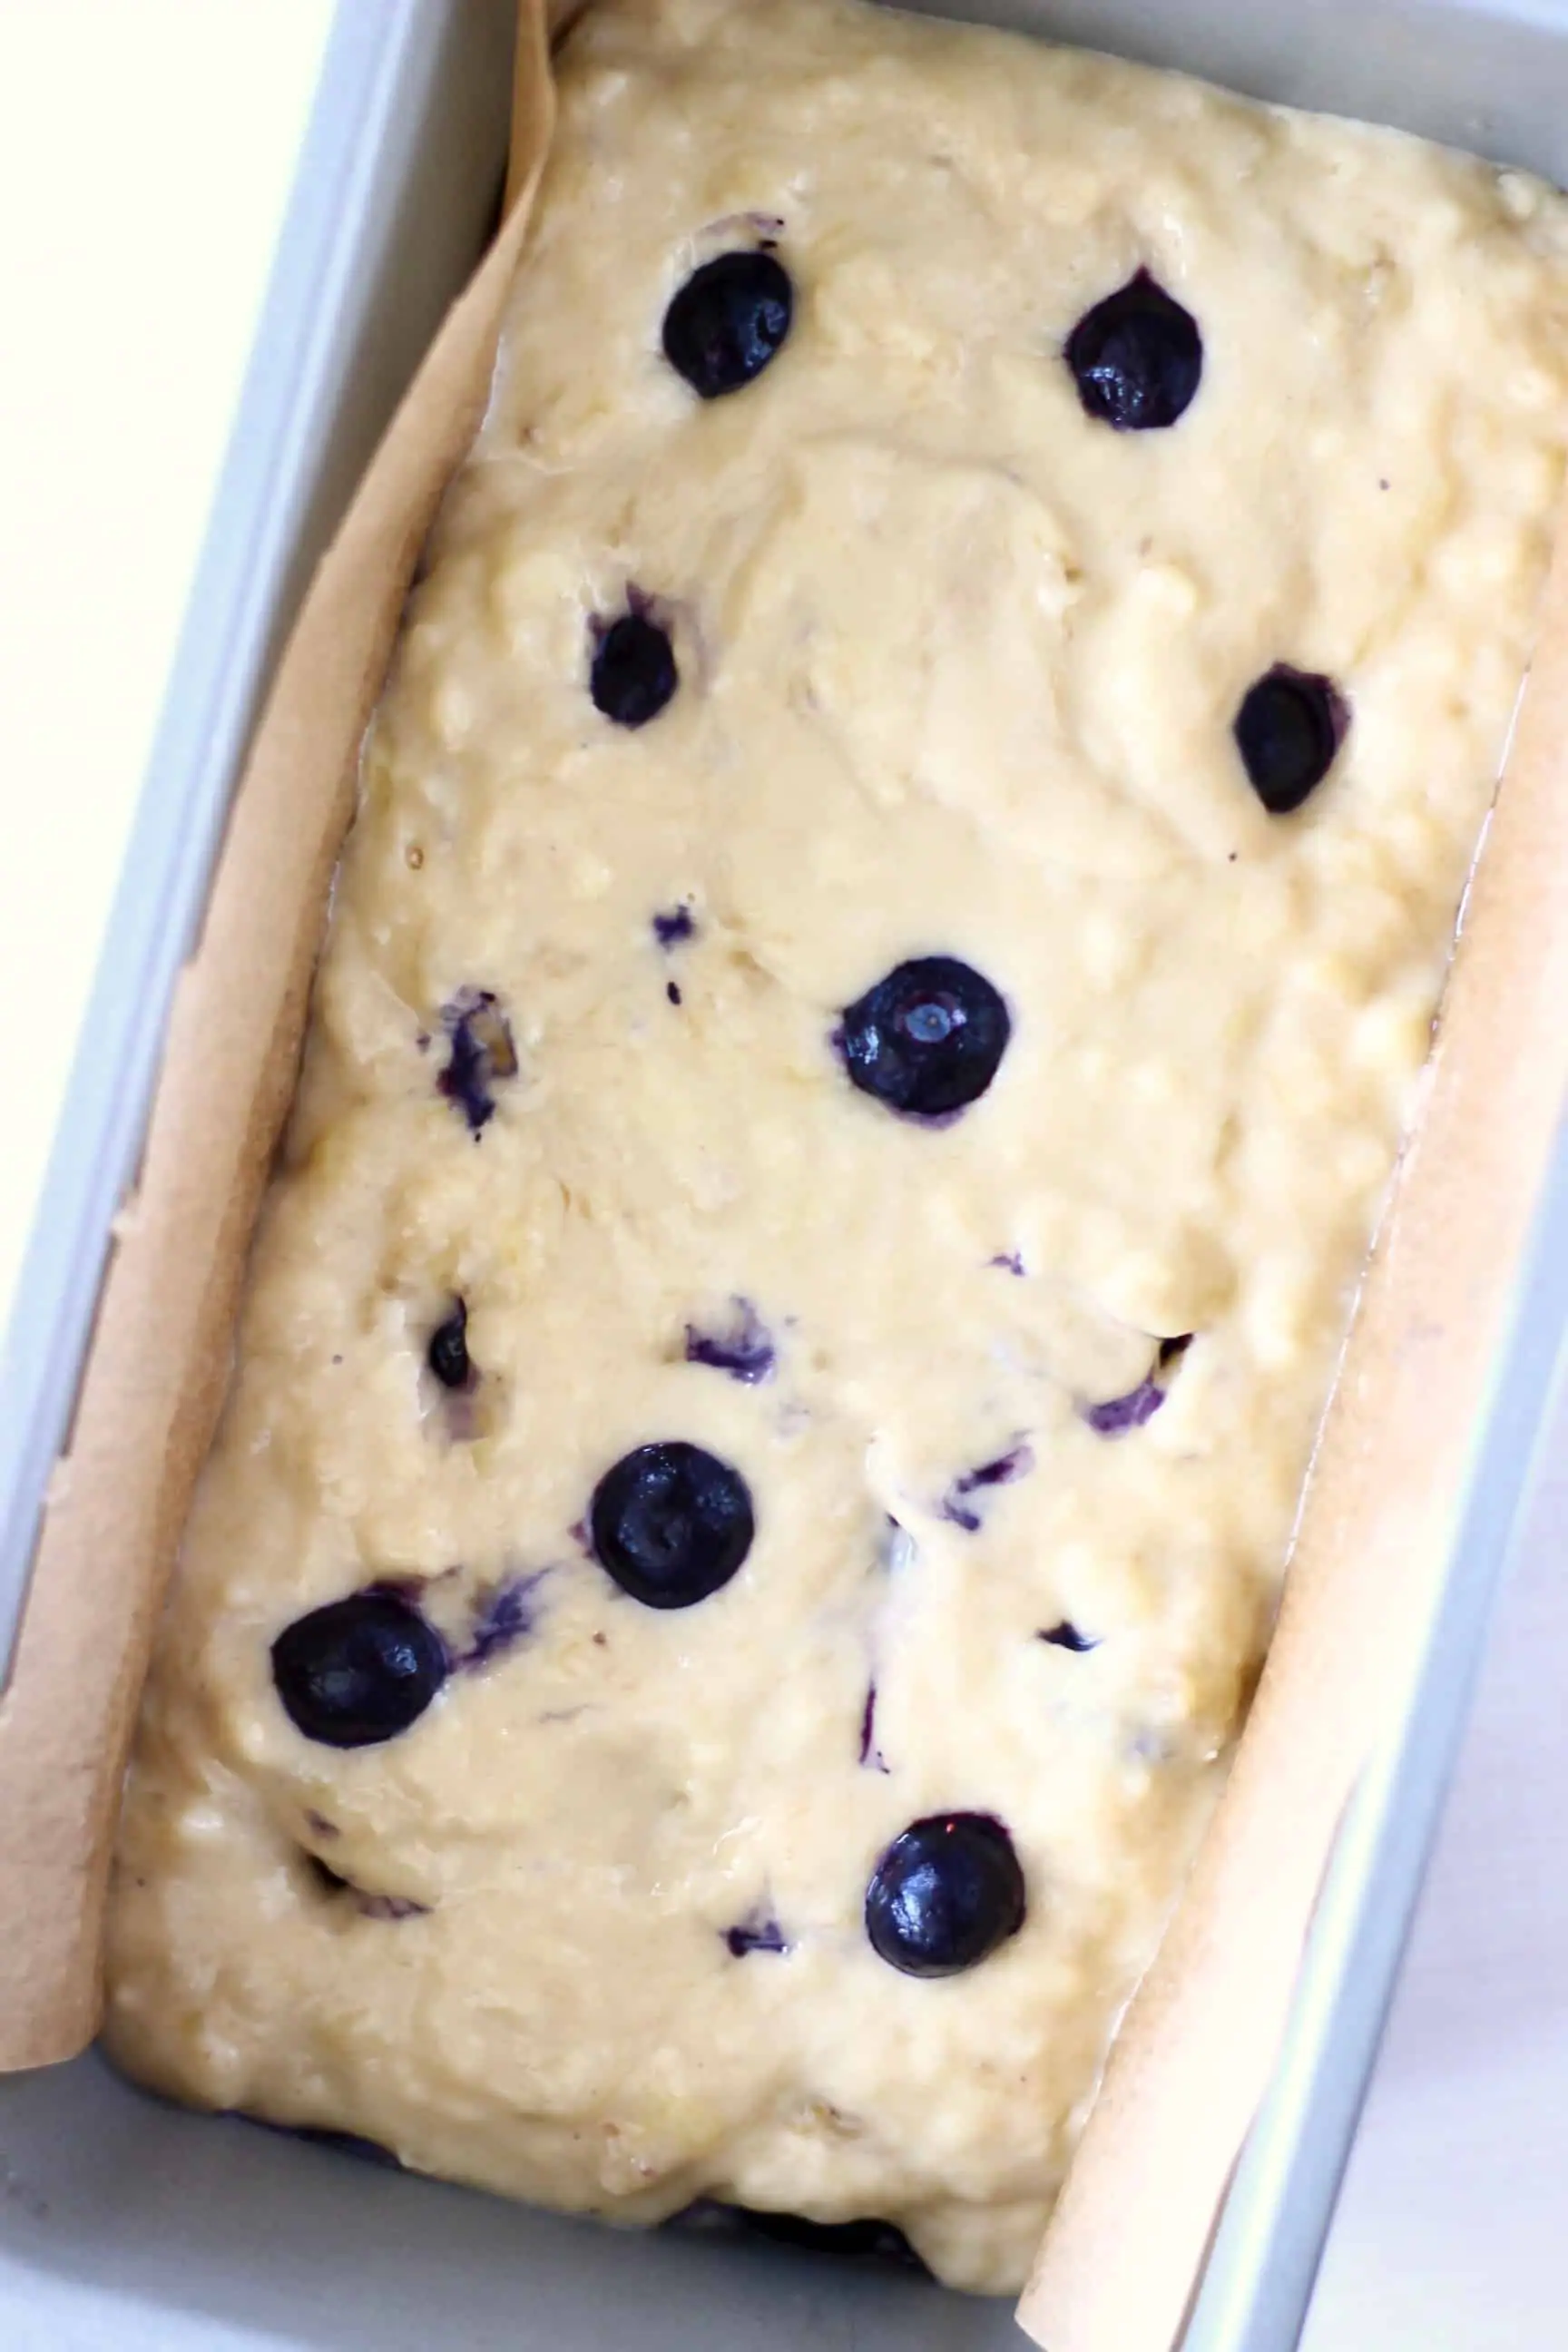 Gluten-free vegan banana bread batter with blueberries in a loaf tin lined with baking paper